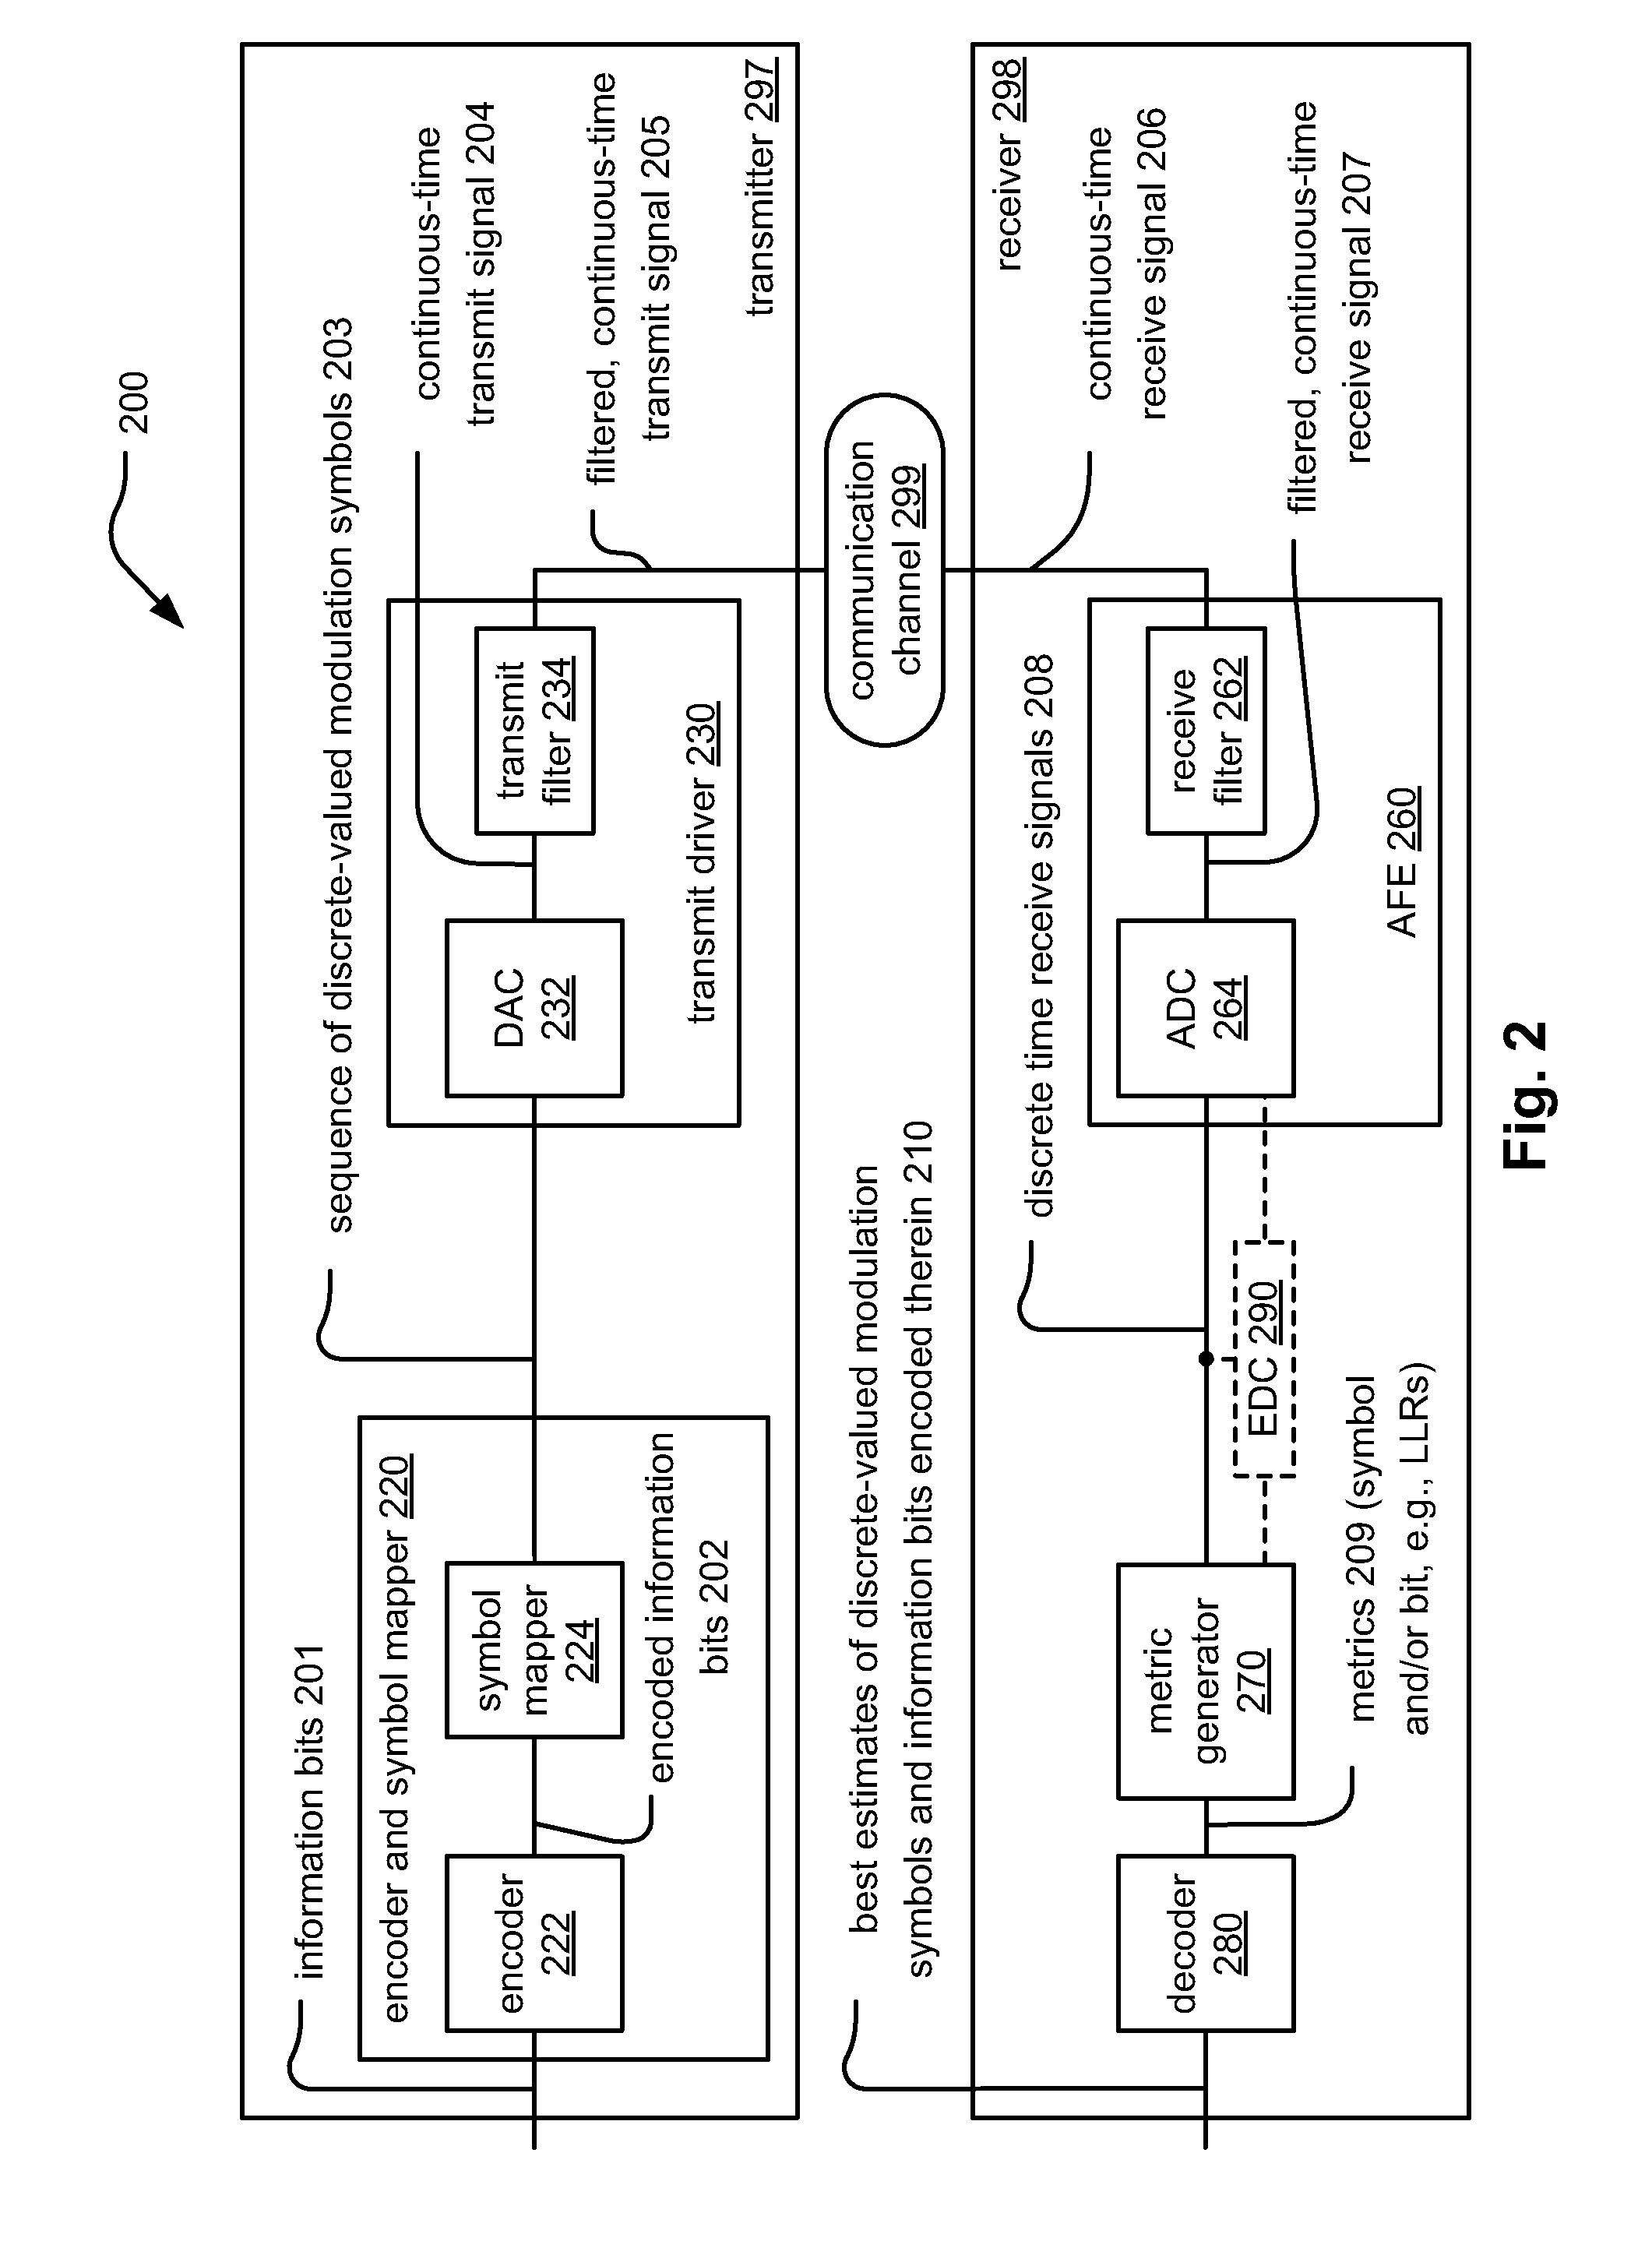 Electronic dispersion compensation within optical communications using reconstruction